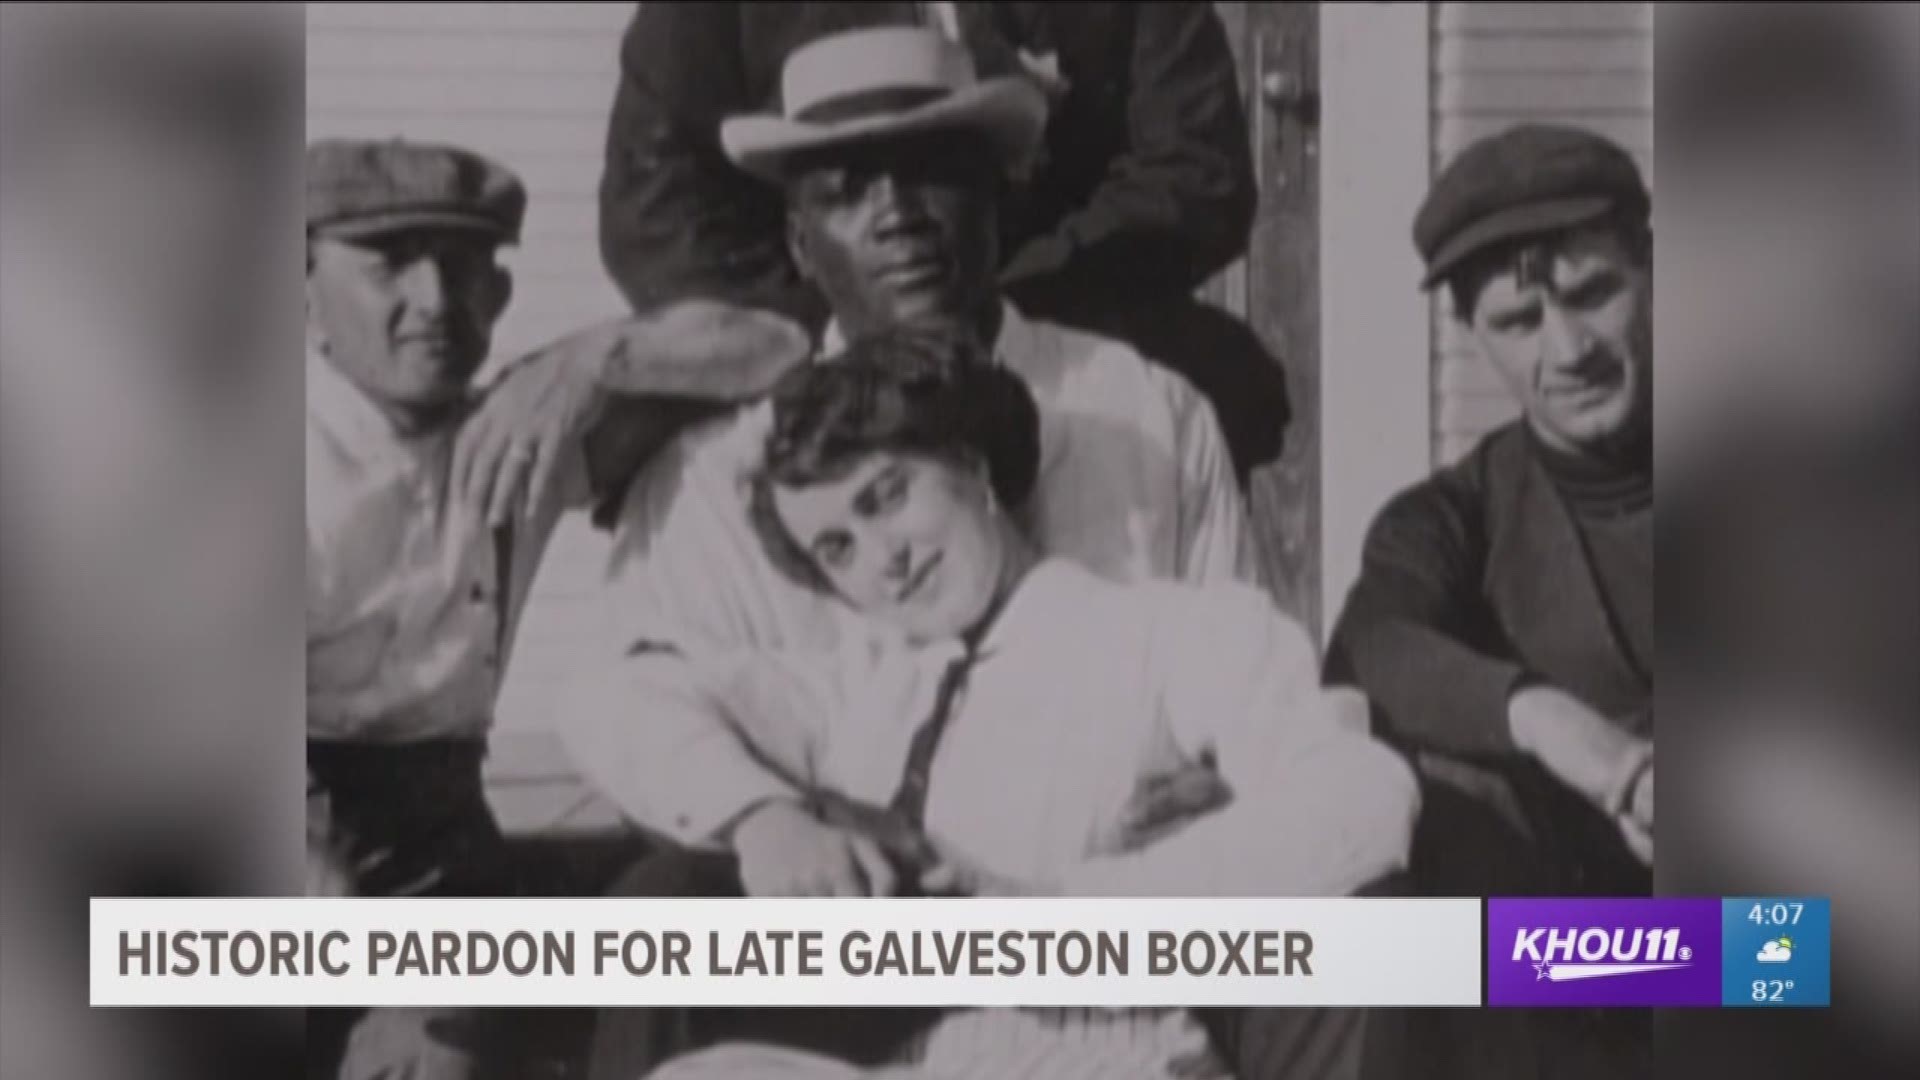 President Donald Trump has granted a rare posthumous pardon to Jack Johnson, boxing's first black heavyweight champion more than 100 years after what Trump said many feel was a racially motivated injustice.